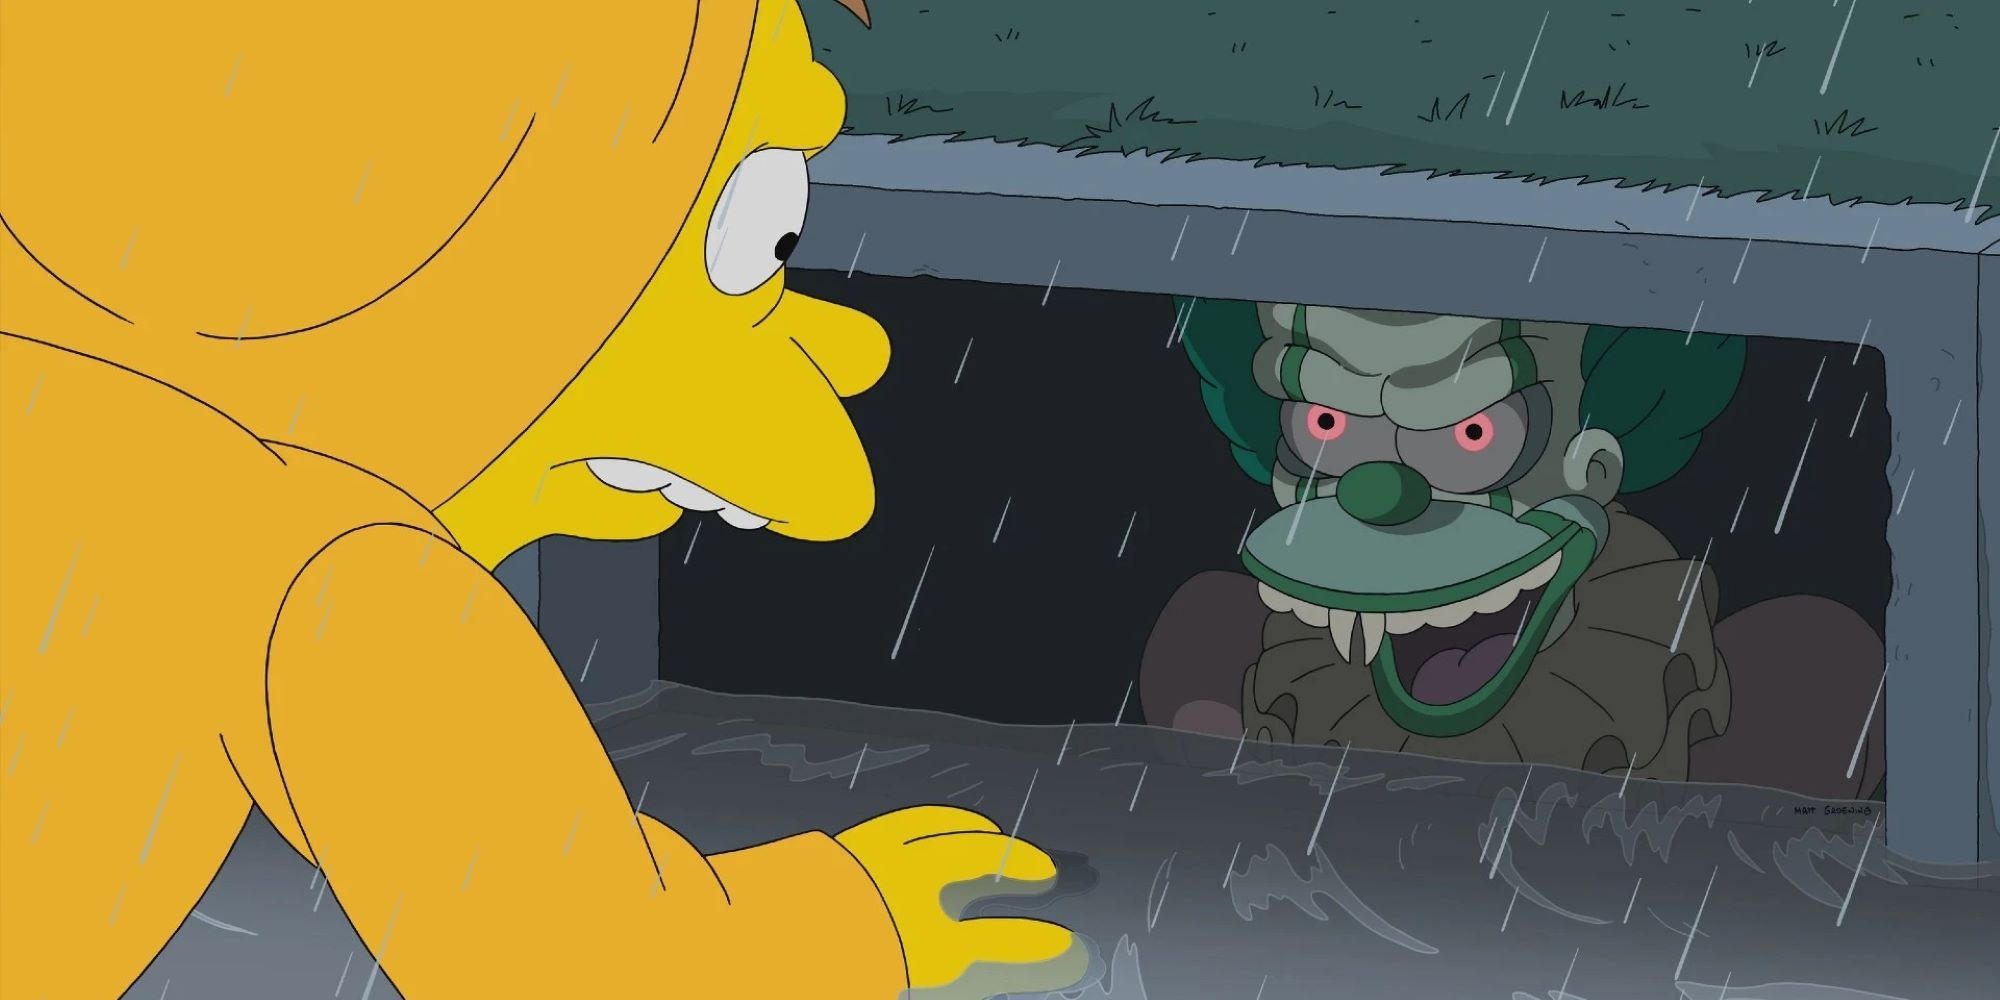 The-Simpsons-Season-34-Episode-5-Not-It Krusty as Pennywise in a storm drain